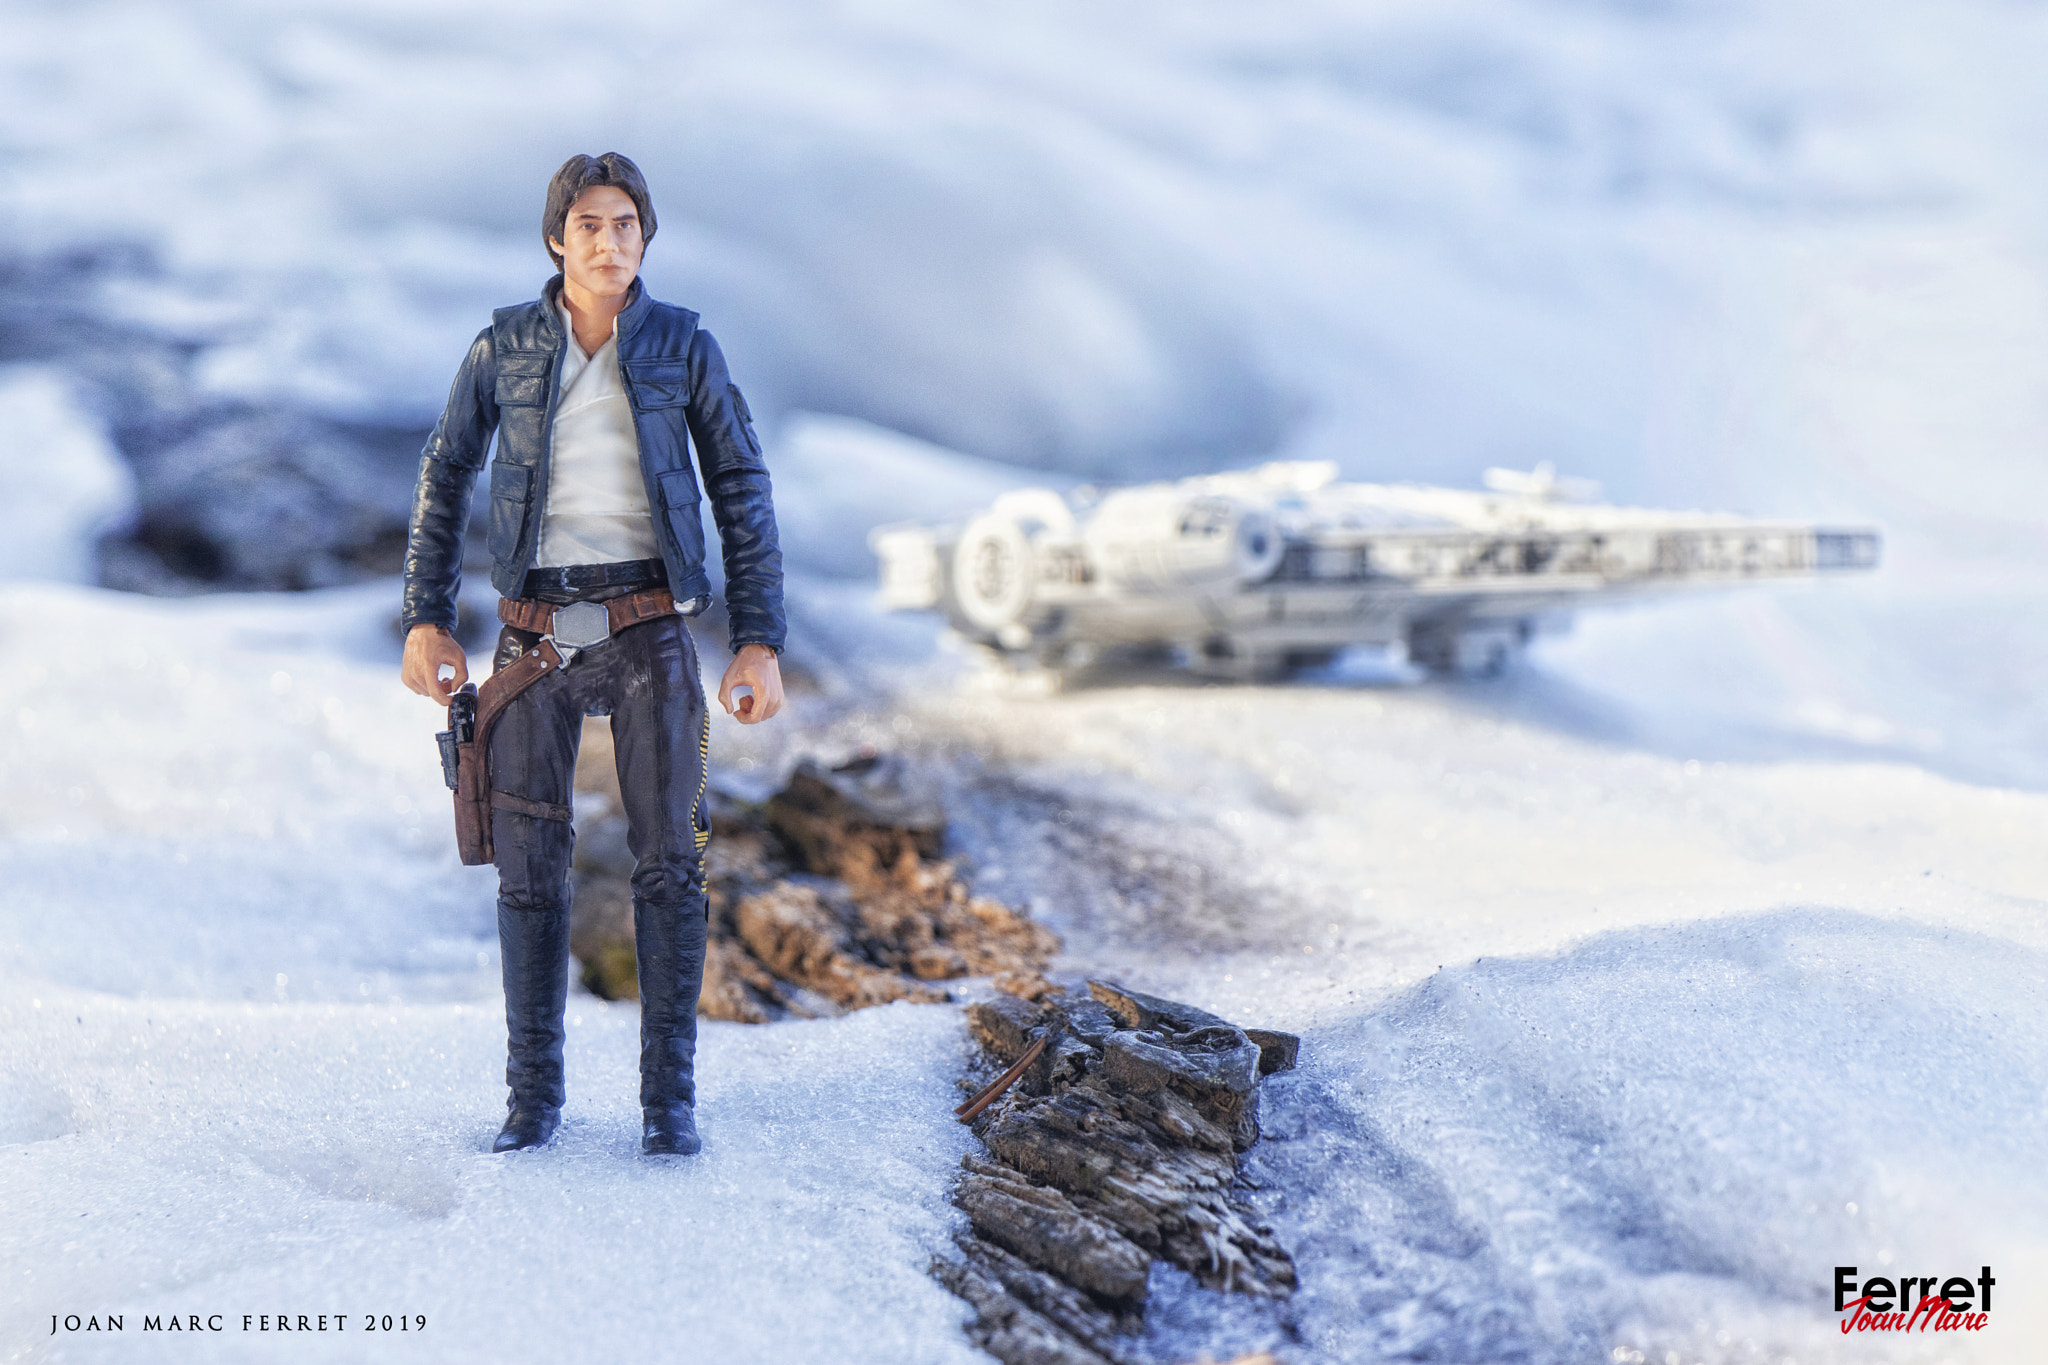 General 2048x1365 toys 500px Han Solo Millennium Falcon Star Wars Ships Star Wars Heroes action figures movie characters closeup watermarked 2019 (year)